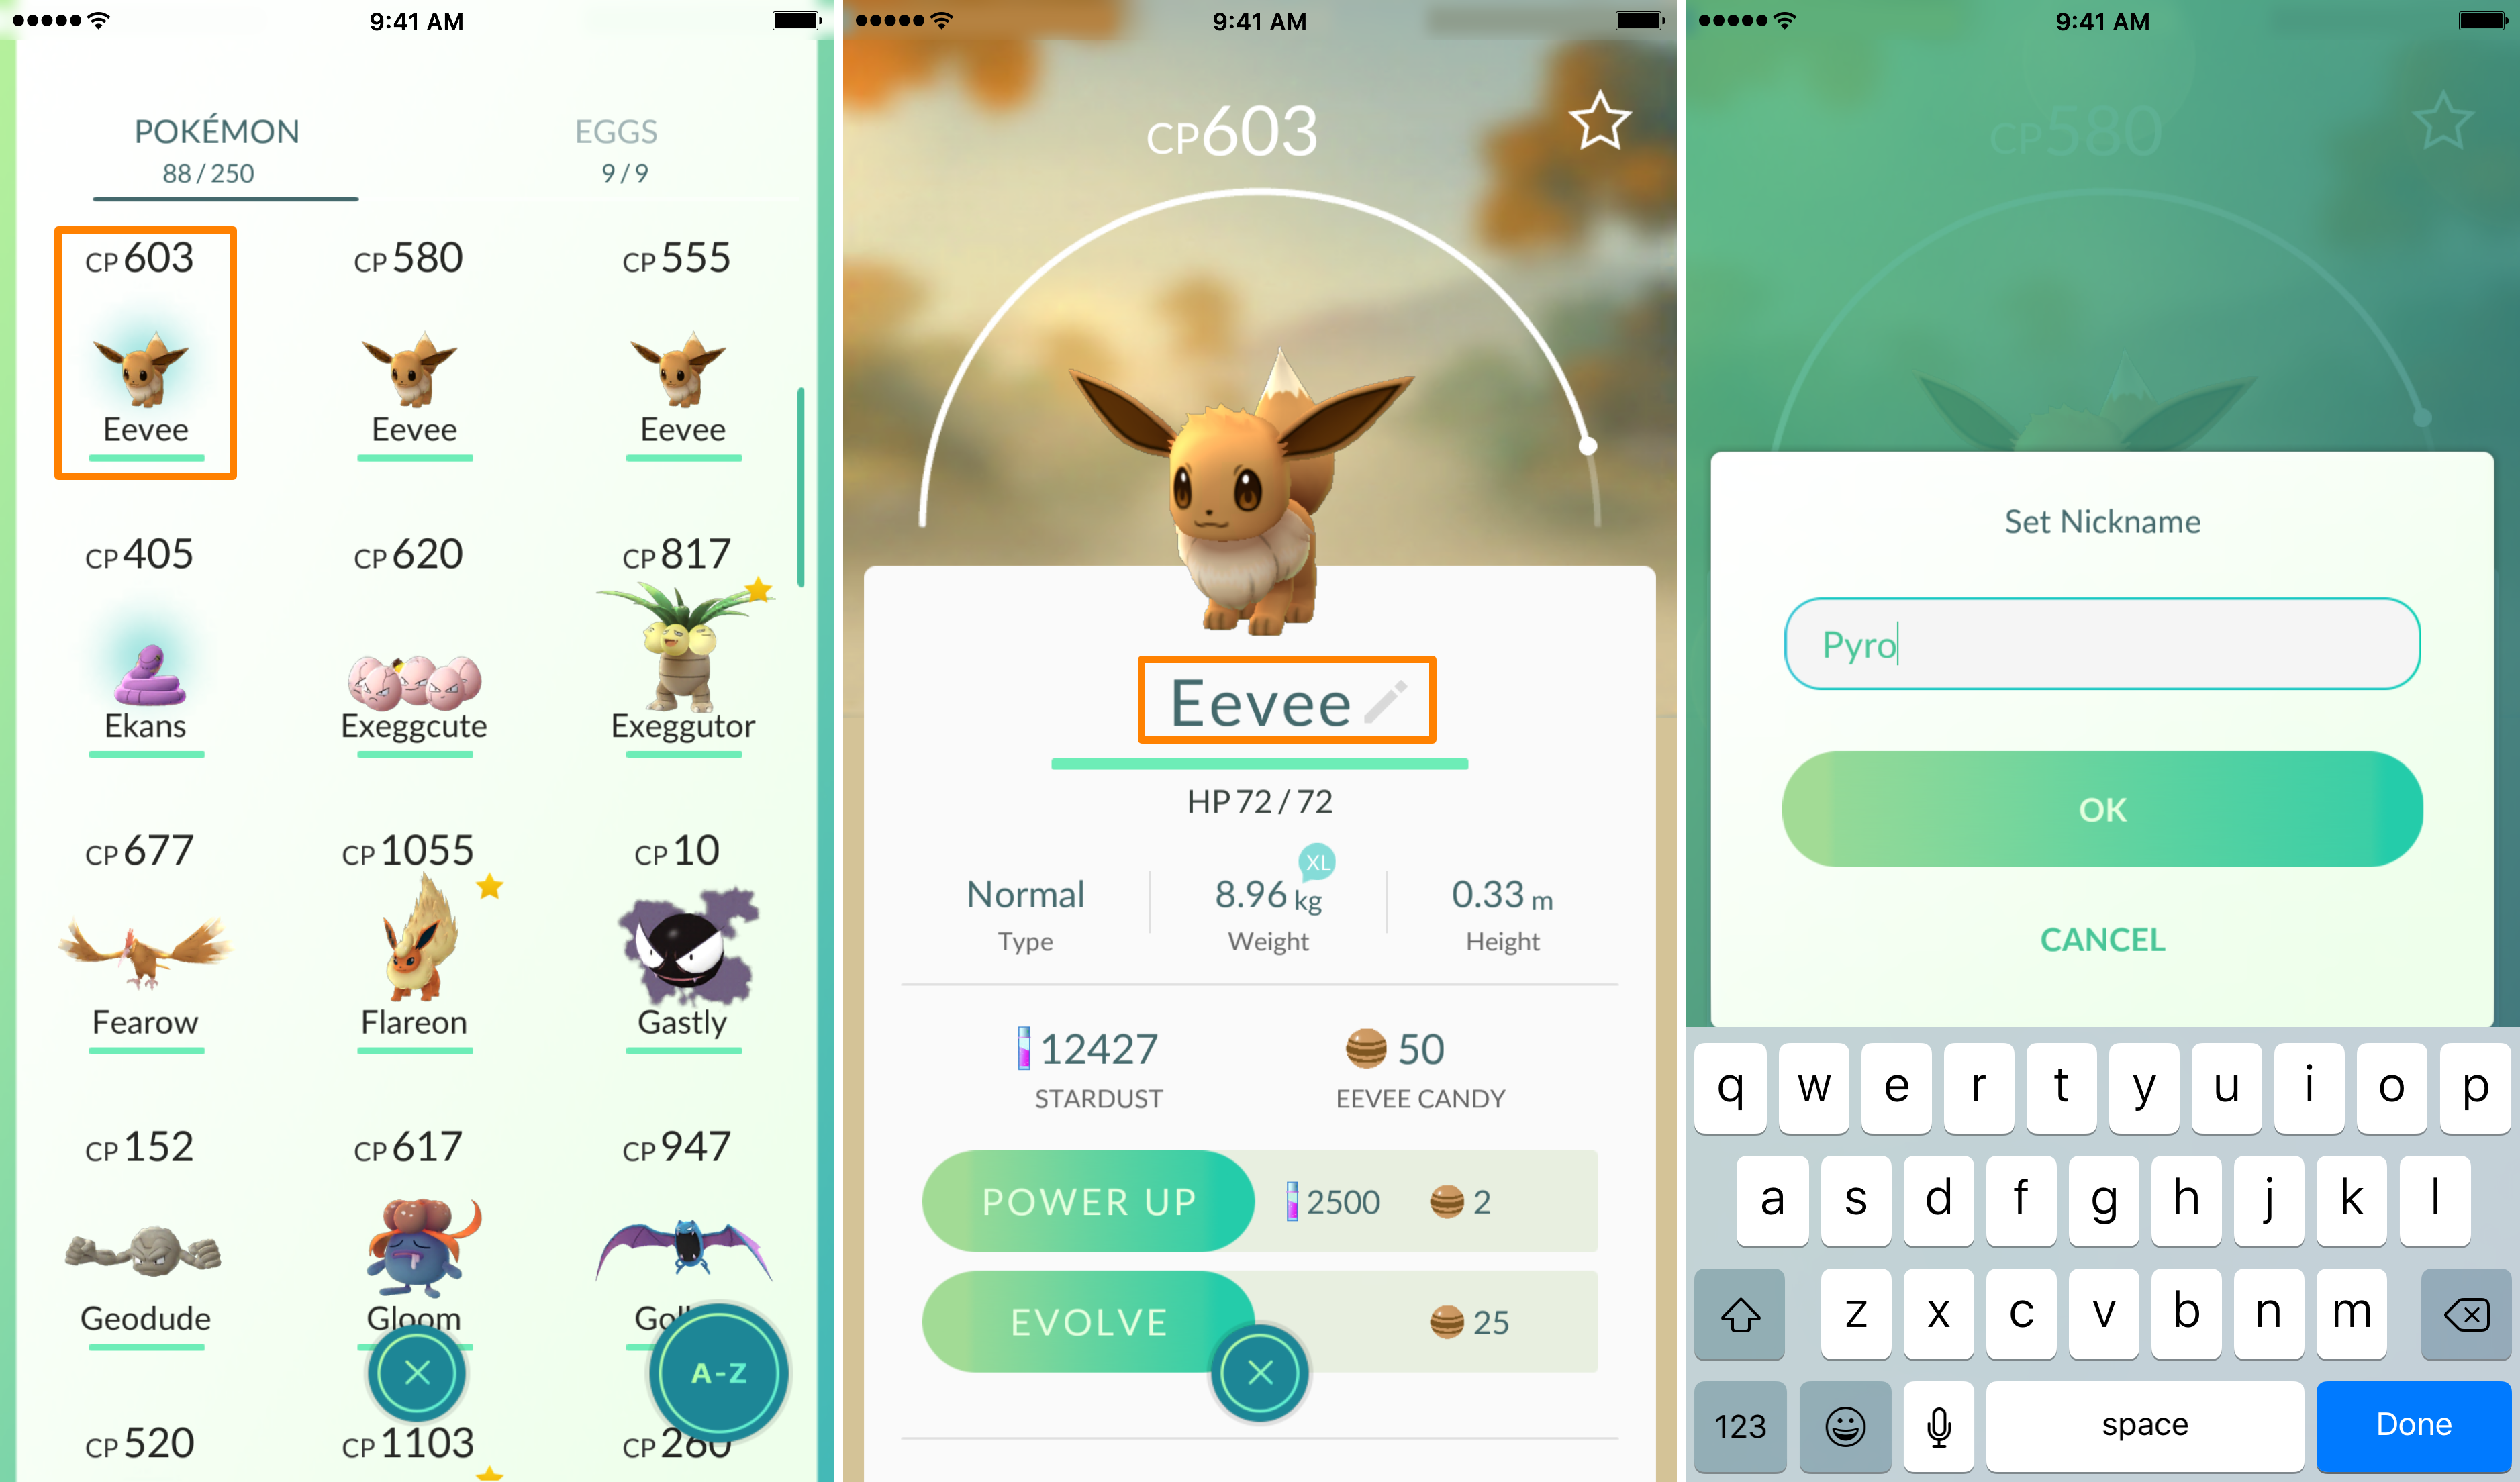 Rename Eevee into Pyro to Get Flareon